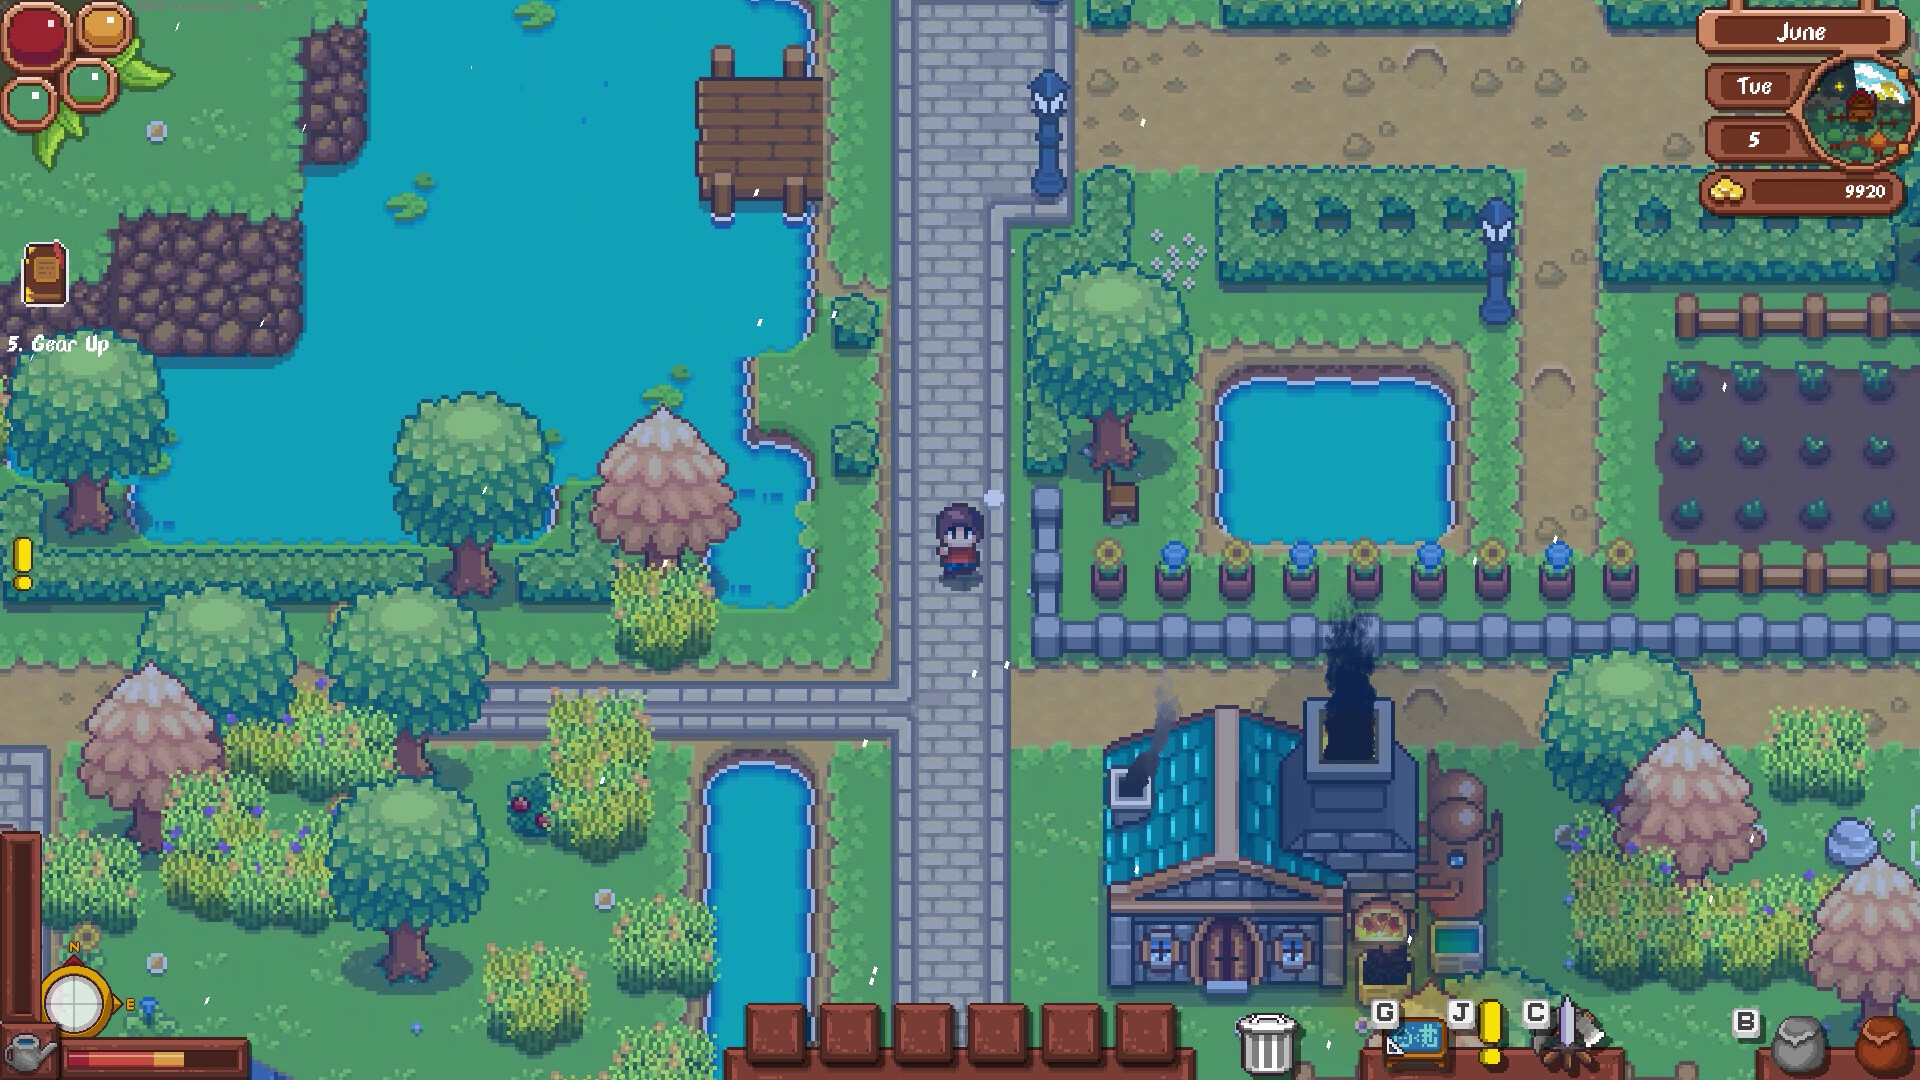 Pixelshire Is A Cute Farming RPG Coming In 2023